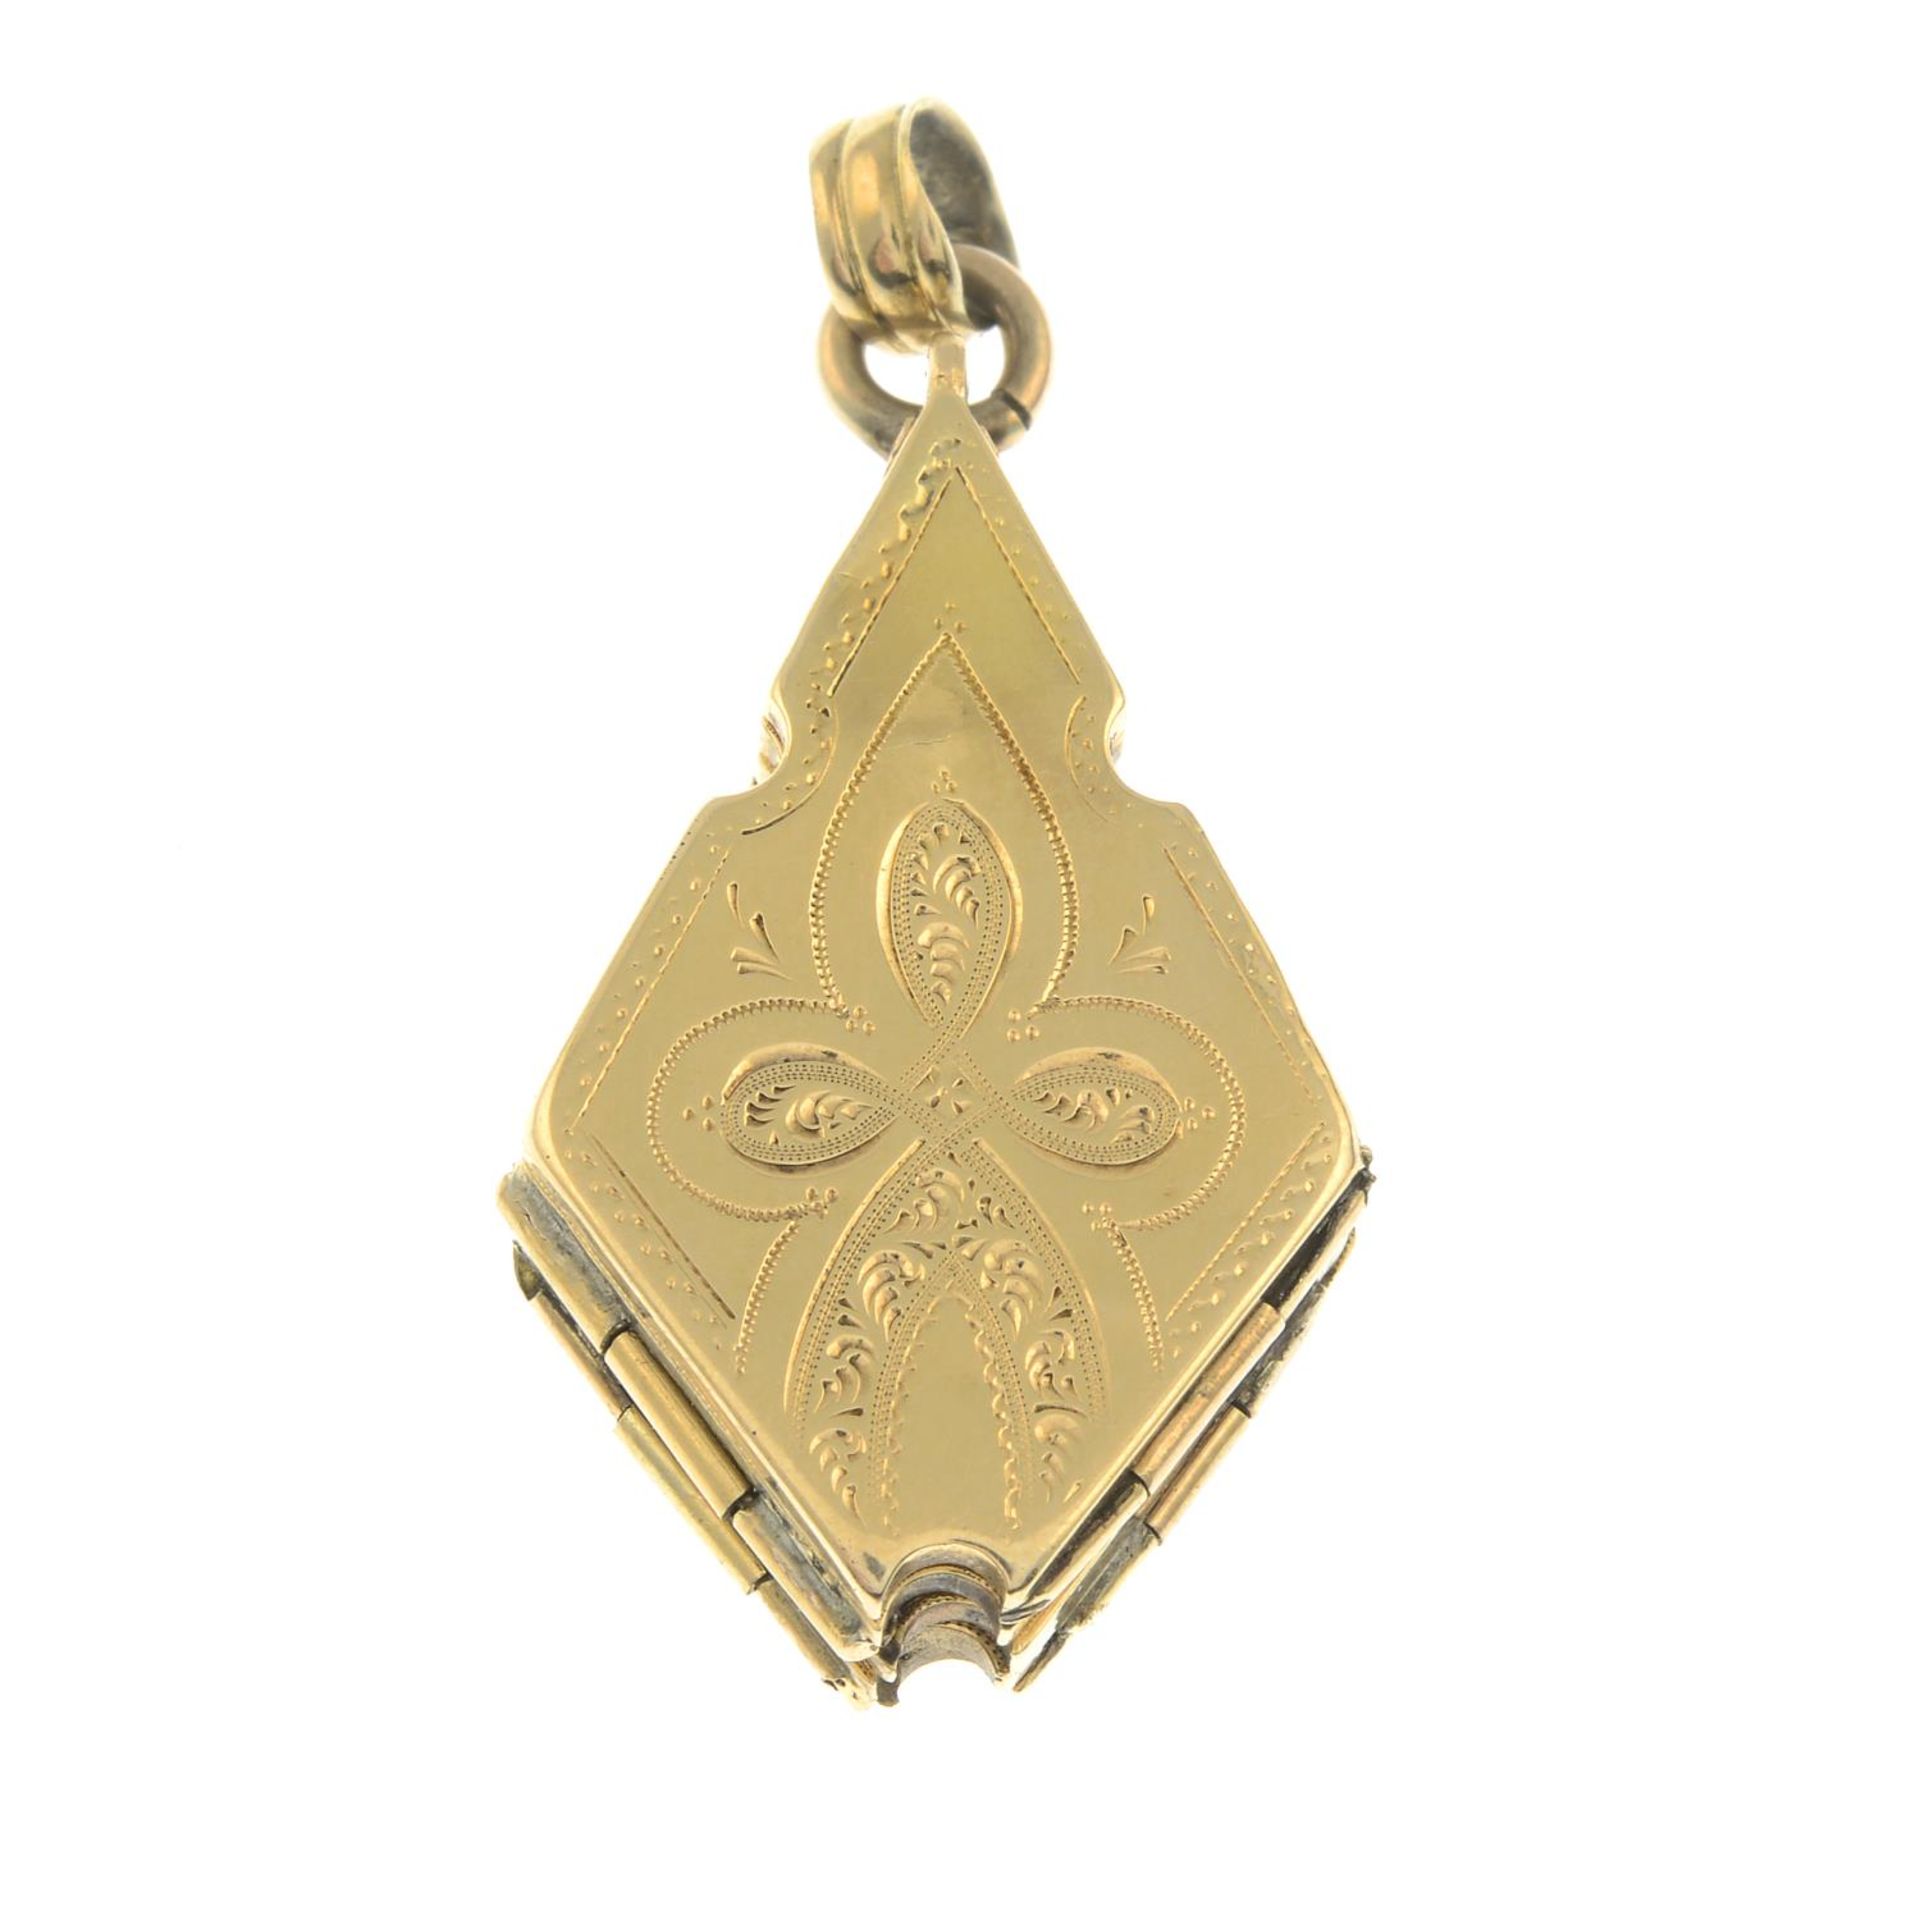 An early 20th century locket, unfurling to reveal star, with oval-shape vacant panels.Length 4cms.